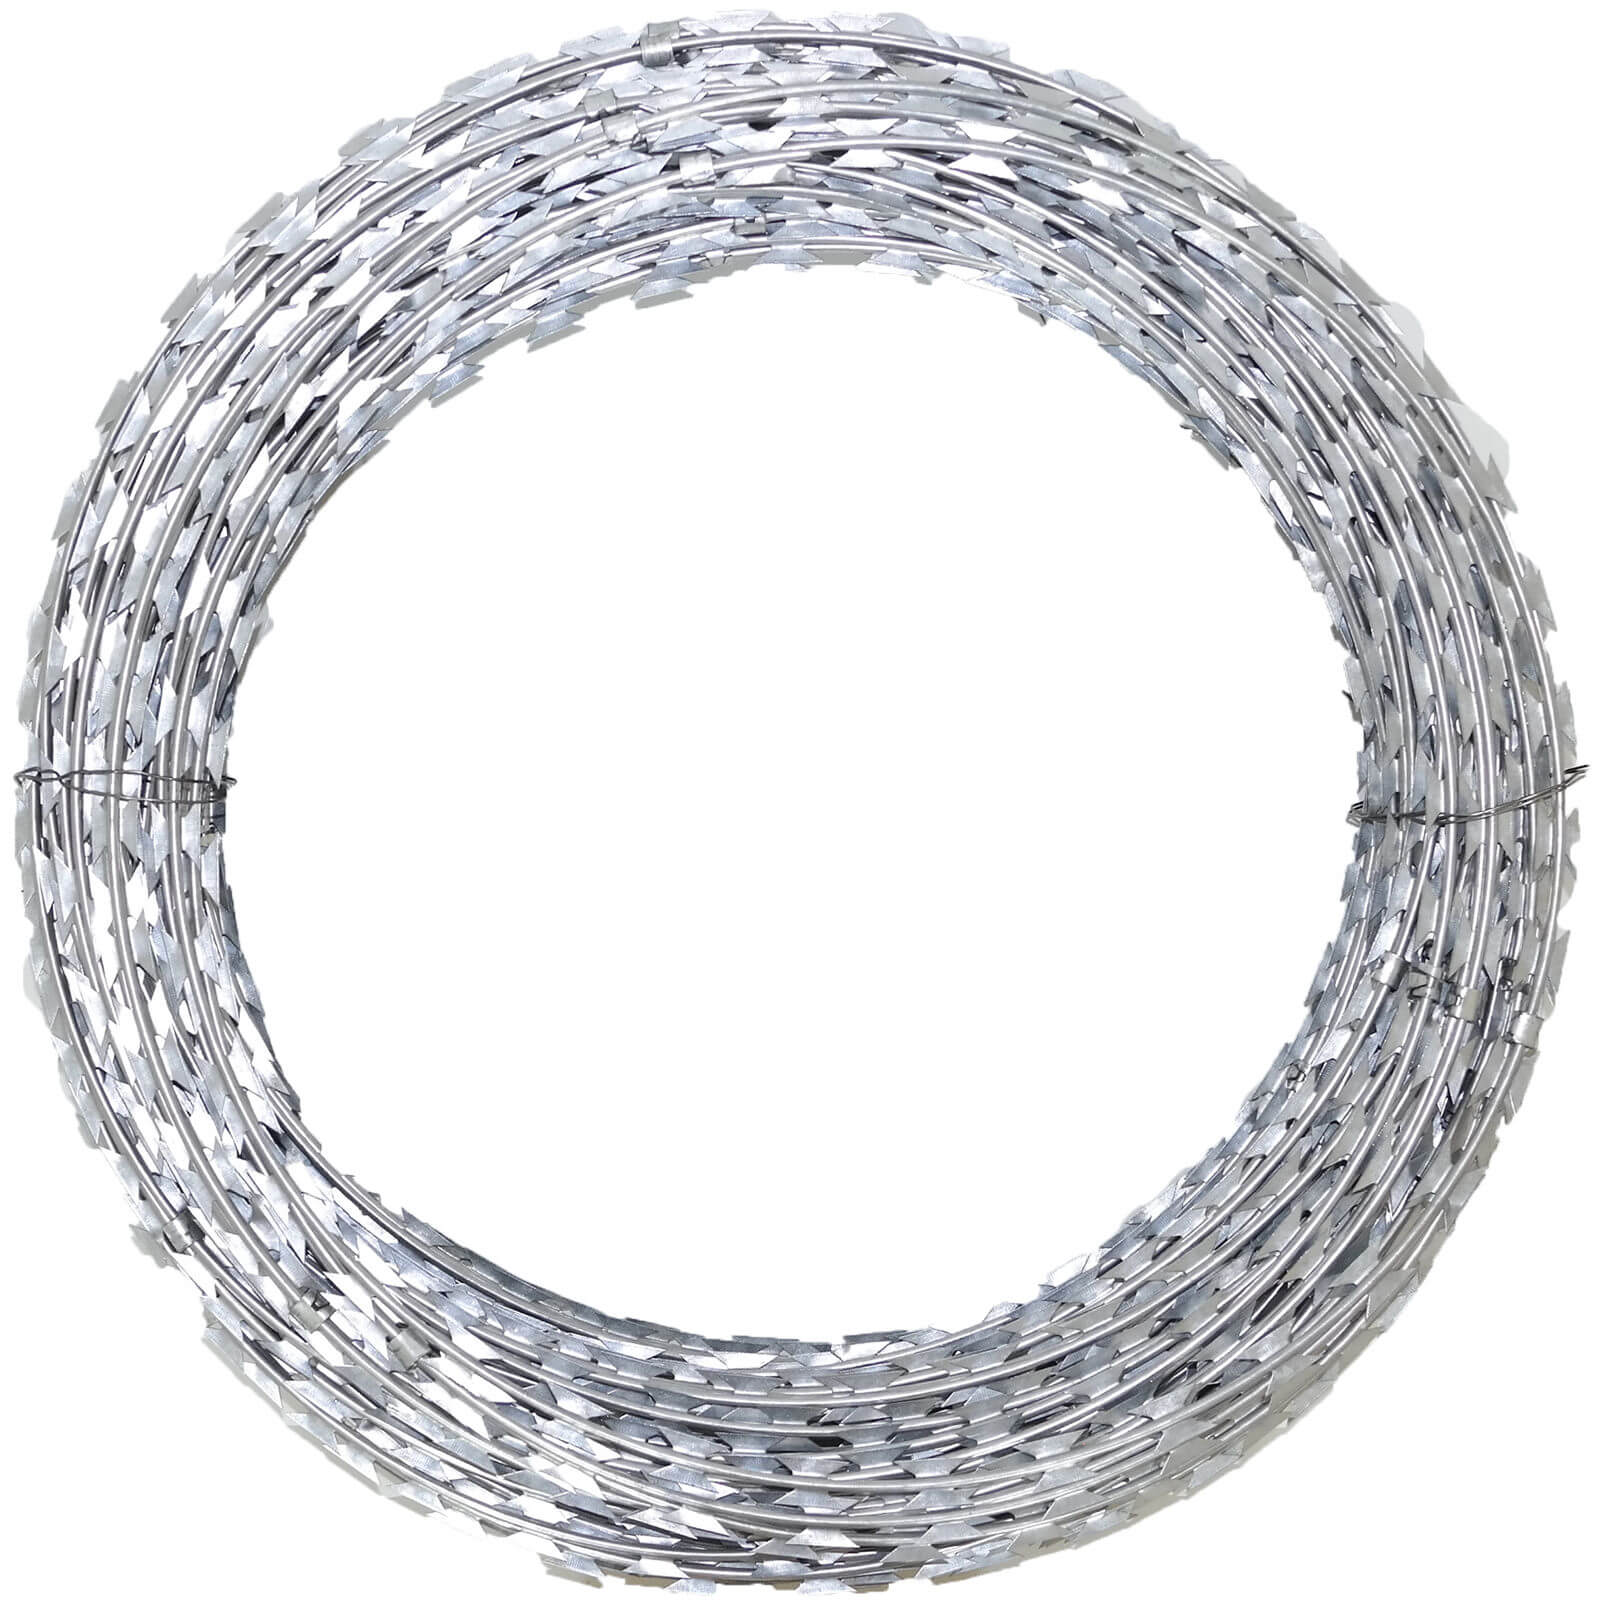 Concertina razor coil: Trusted Barbed Wire Coil for Effective Security Measures